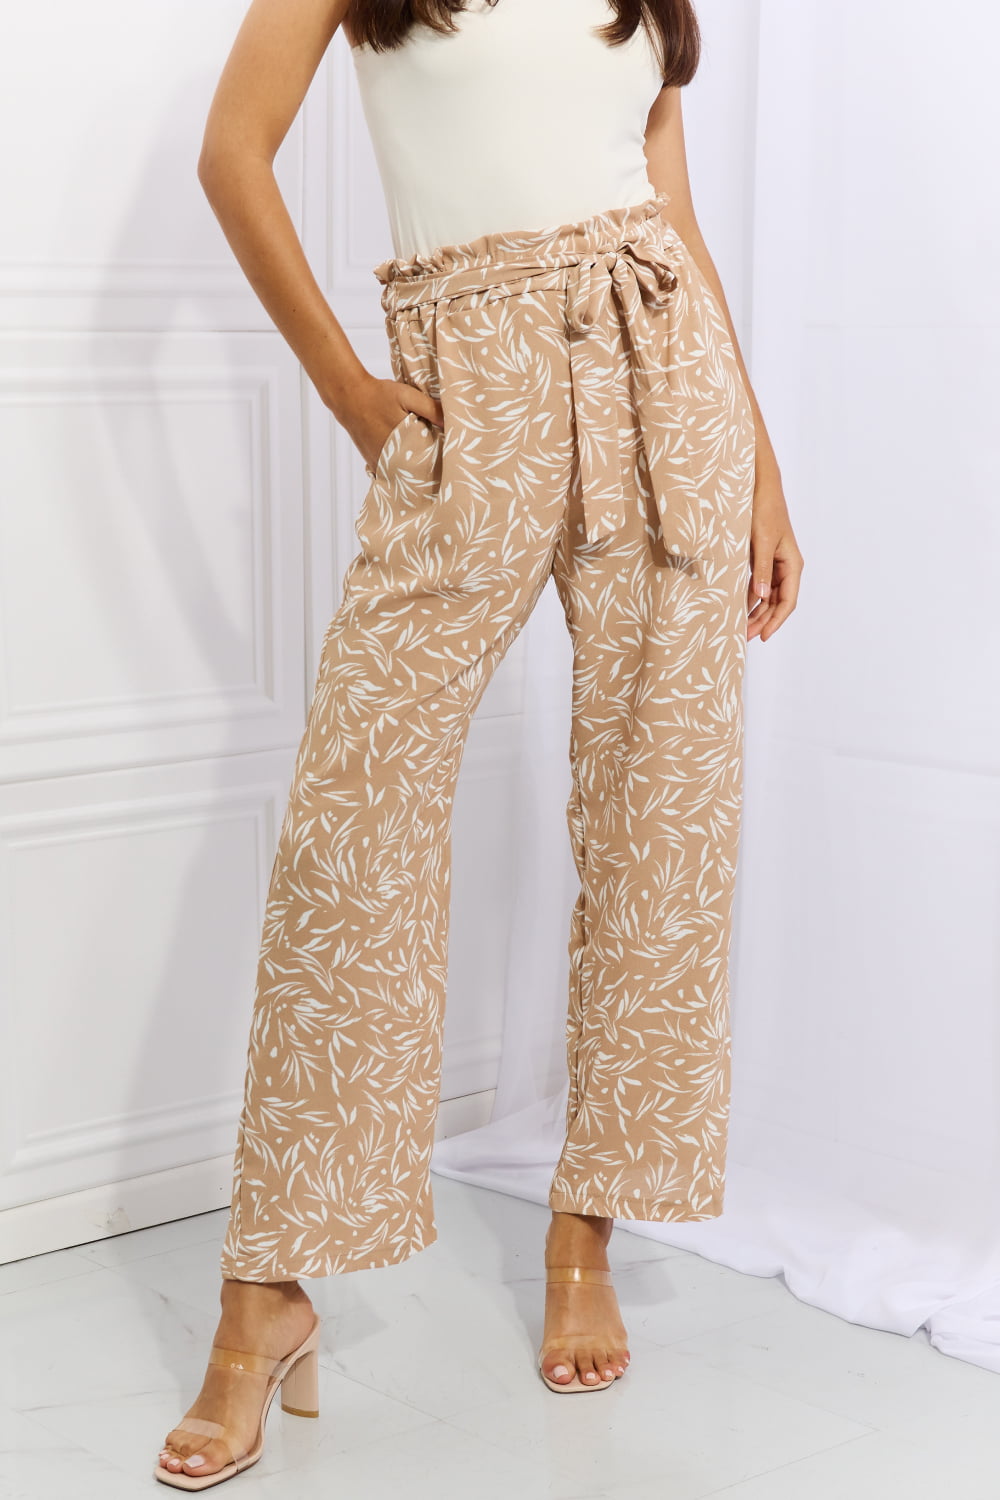 Heimish Right Angle Geometric Printed Pants in Tan - FunkyPeacockStore (Store description)